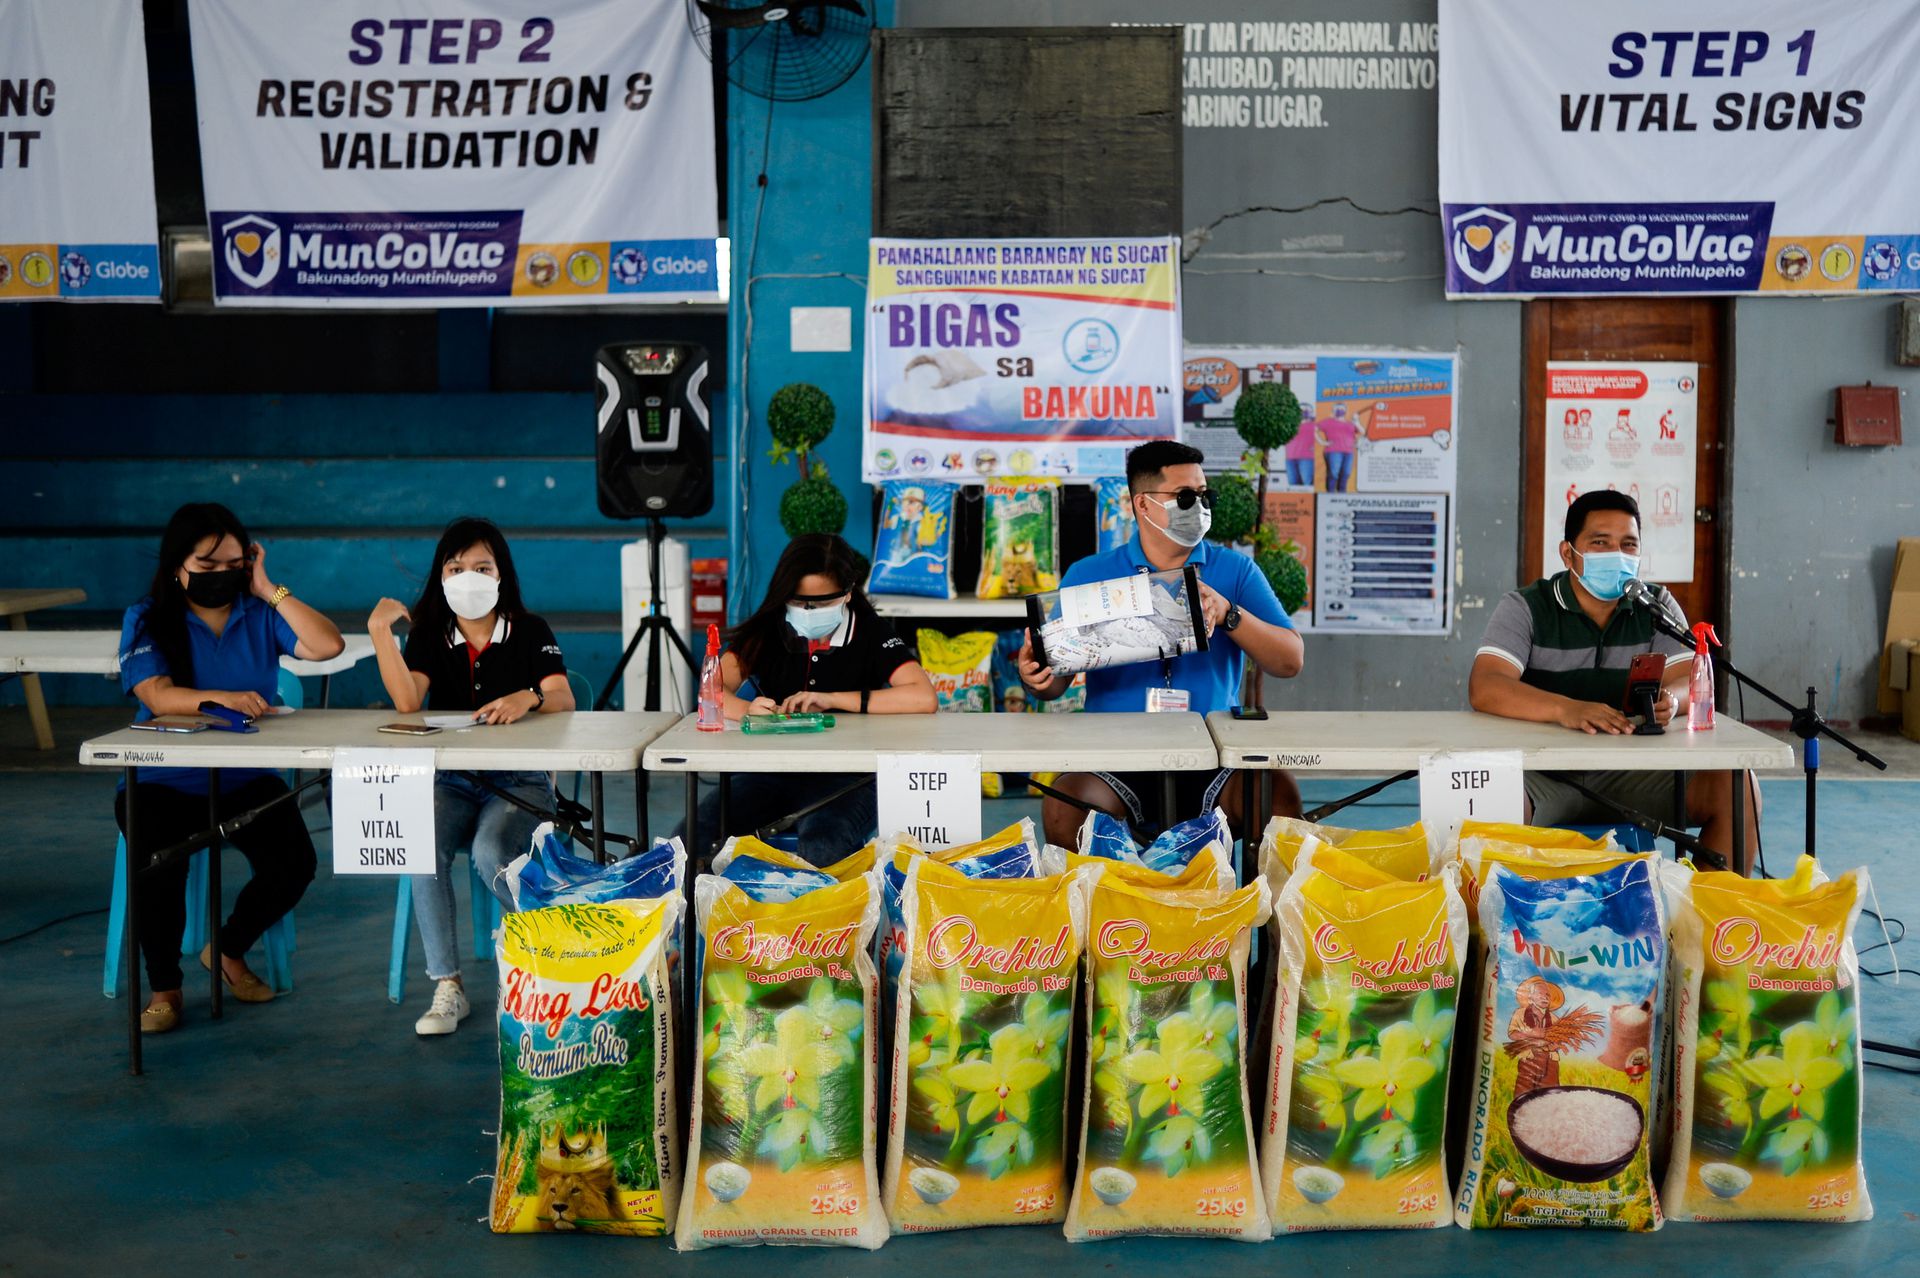 Village officials hold the weekly raffle draw of sacks of rice for residents vaccinated against the coronavirus disease (COVID-19), at the Barangay Sucat Covered Court, in Muntinlupa City, Metro Manila, Philippines, June 20, 2021. (Photo courtesy of REUTERS/Lisa Marie David)